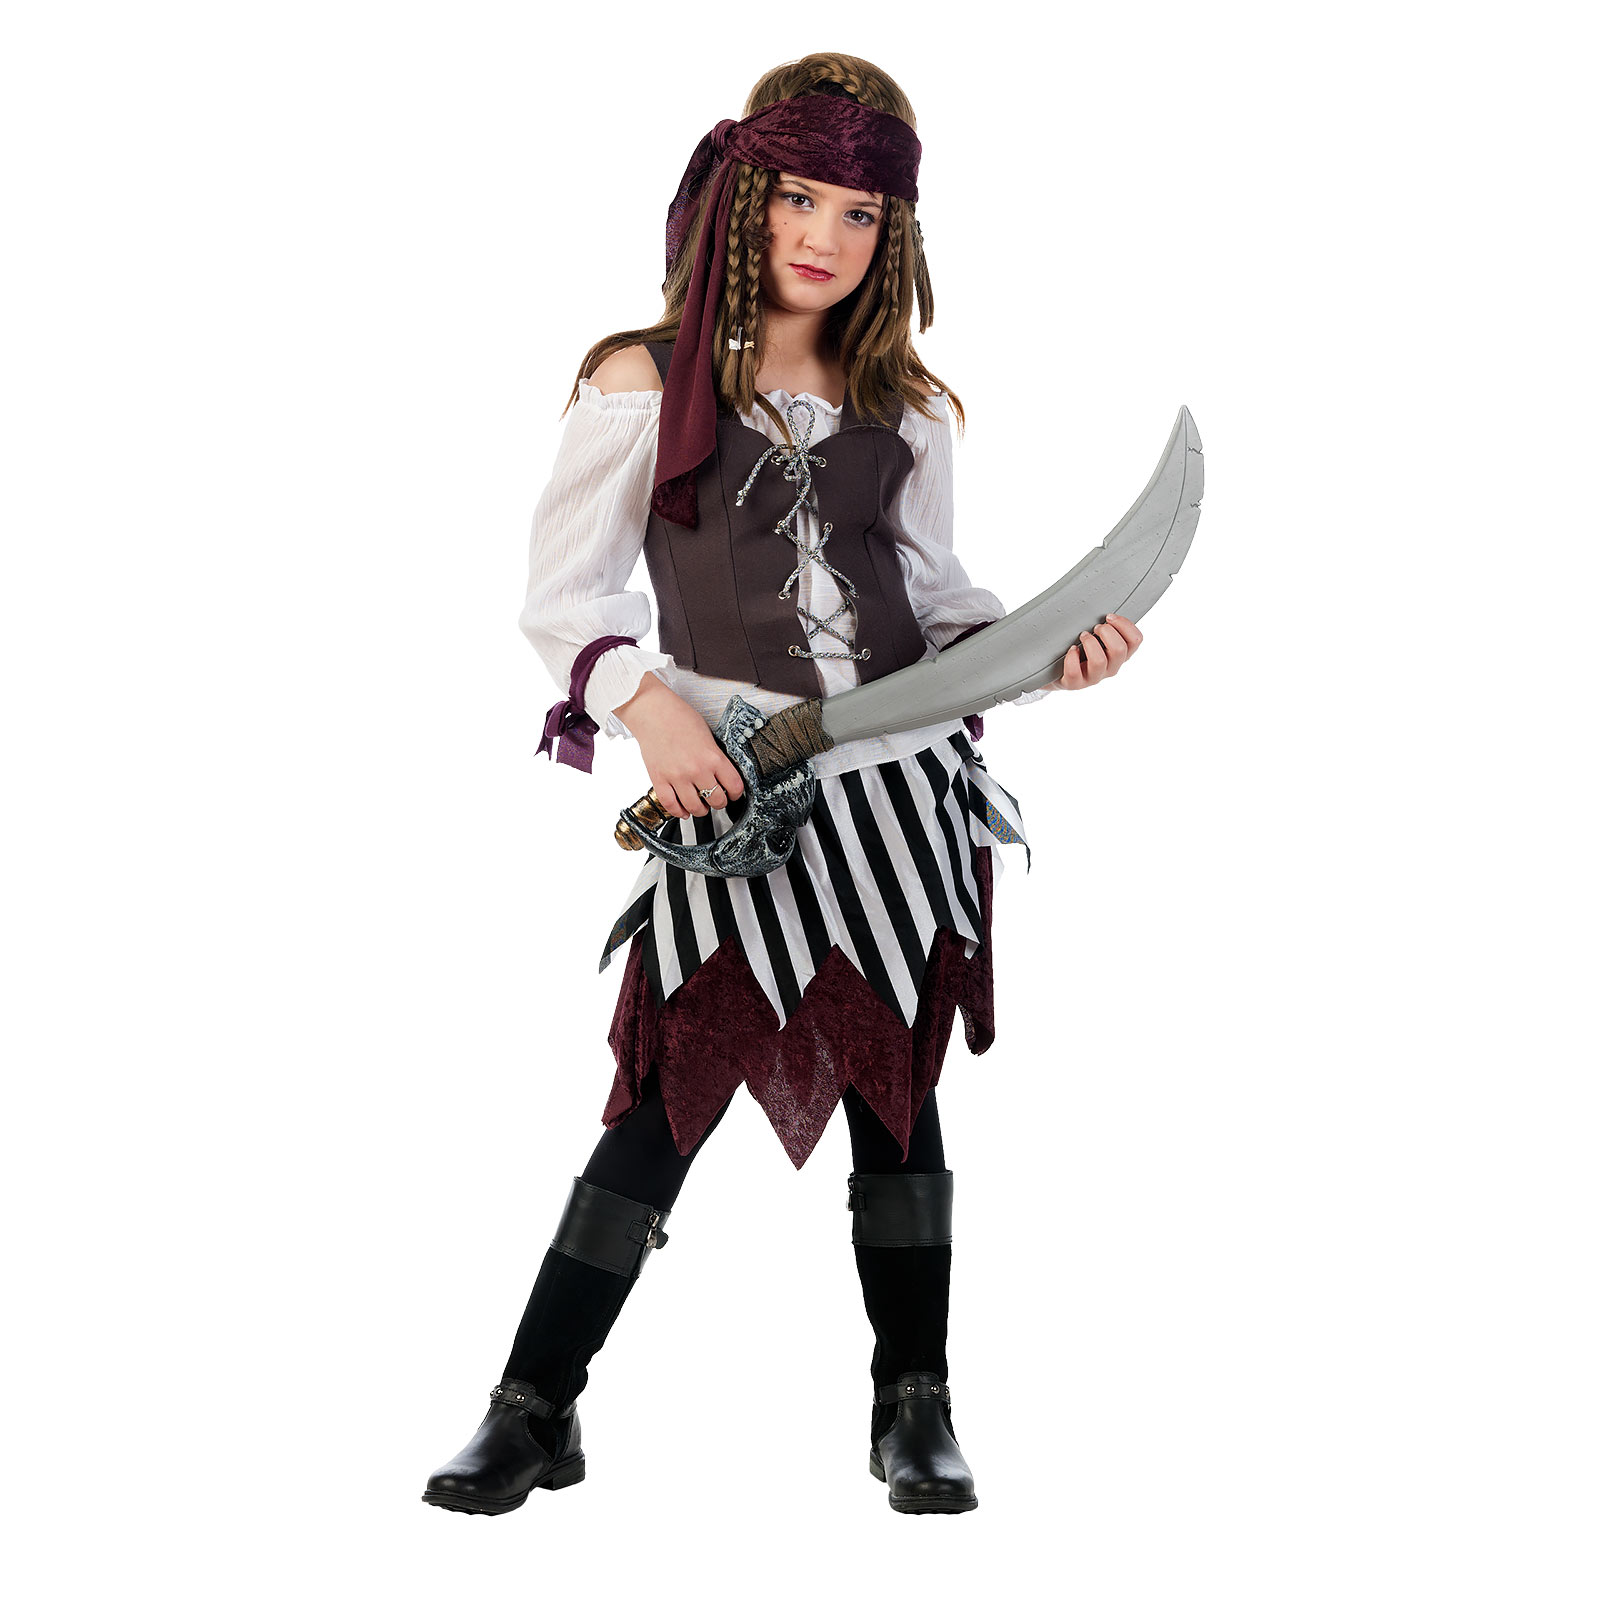 Freebooter of the Seven Seas - Children's Costume